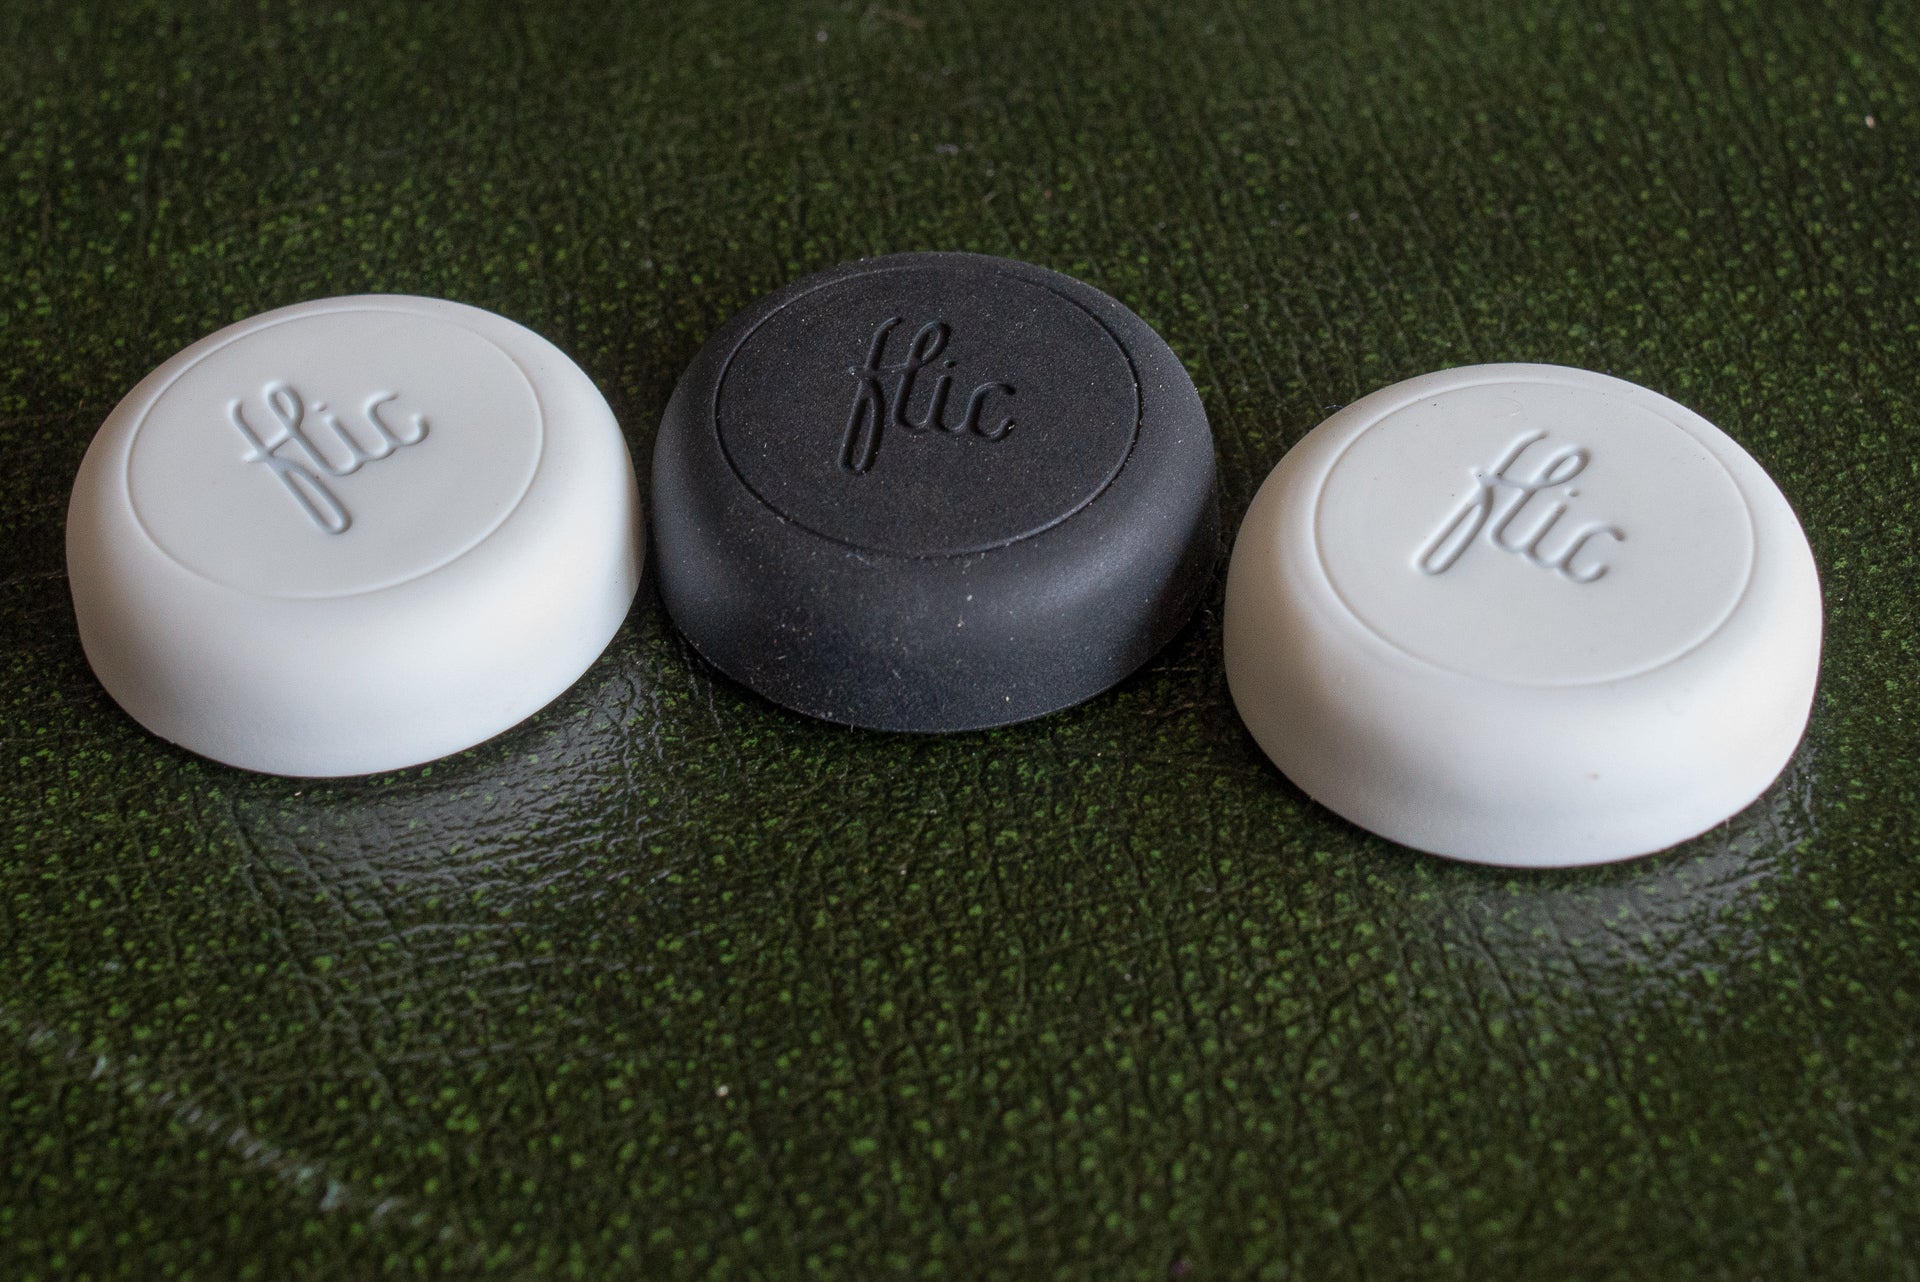 Three Flic smart buttons in white and black colors.